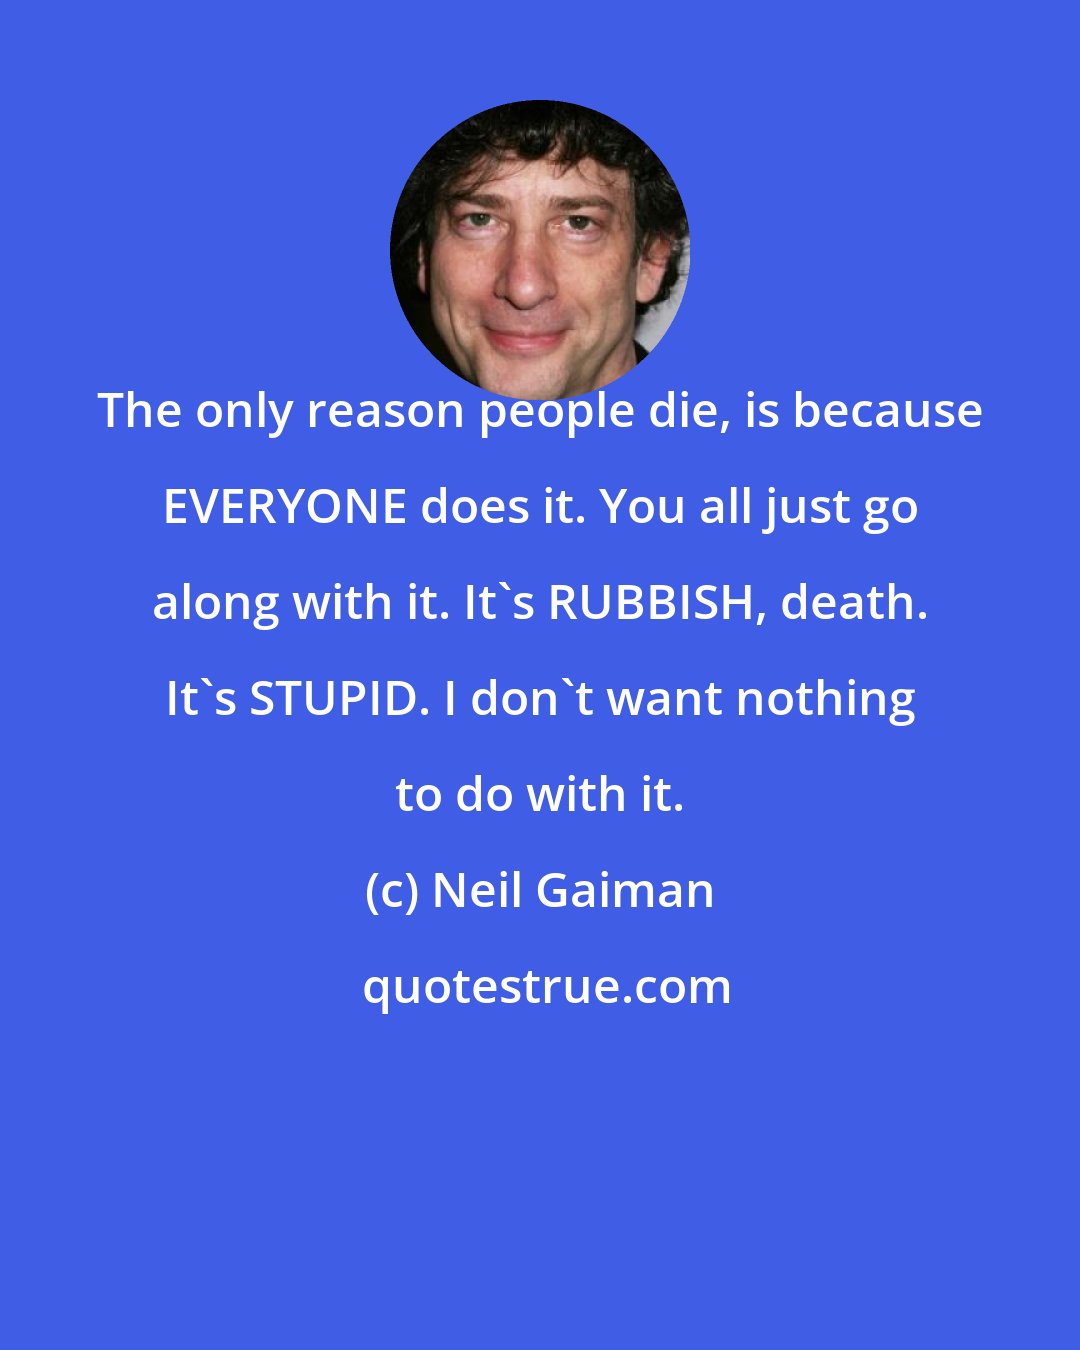 Neil Gaiman: The only reason people die, is because EVERYONE does it. You all just go along with it. It's RUBBISH, death. It's STUPID. I don't want nothing to do with it.